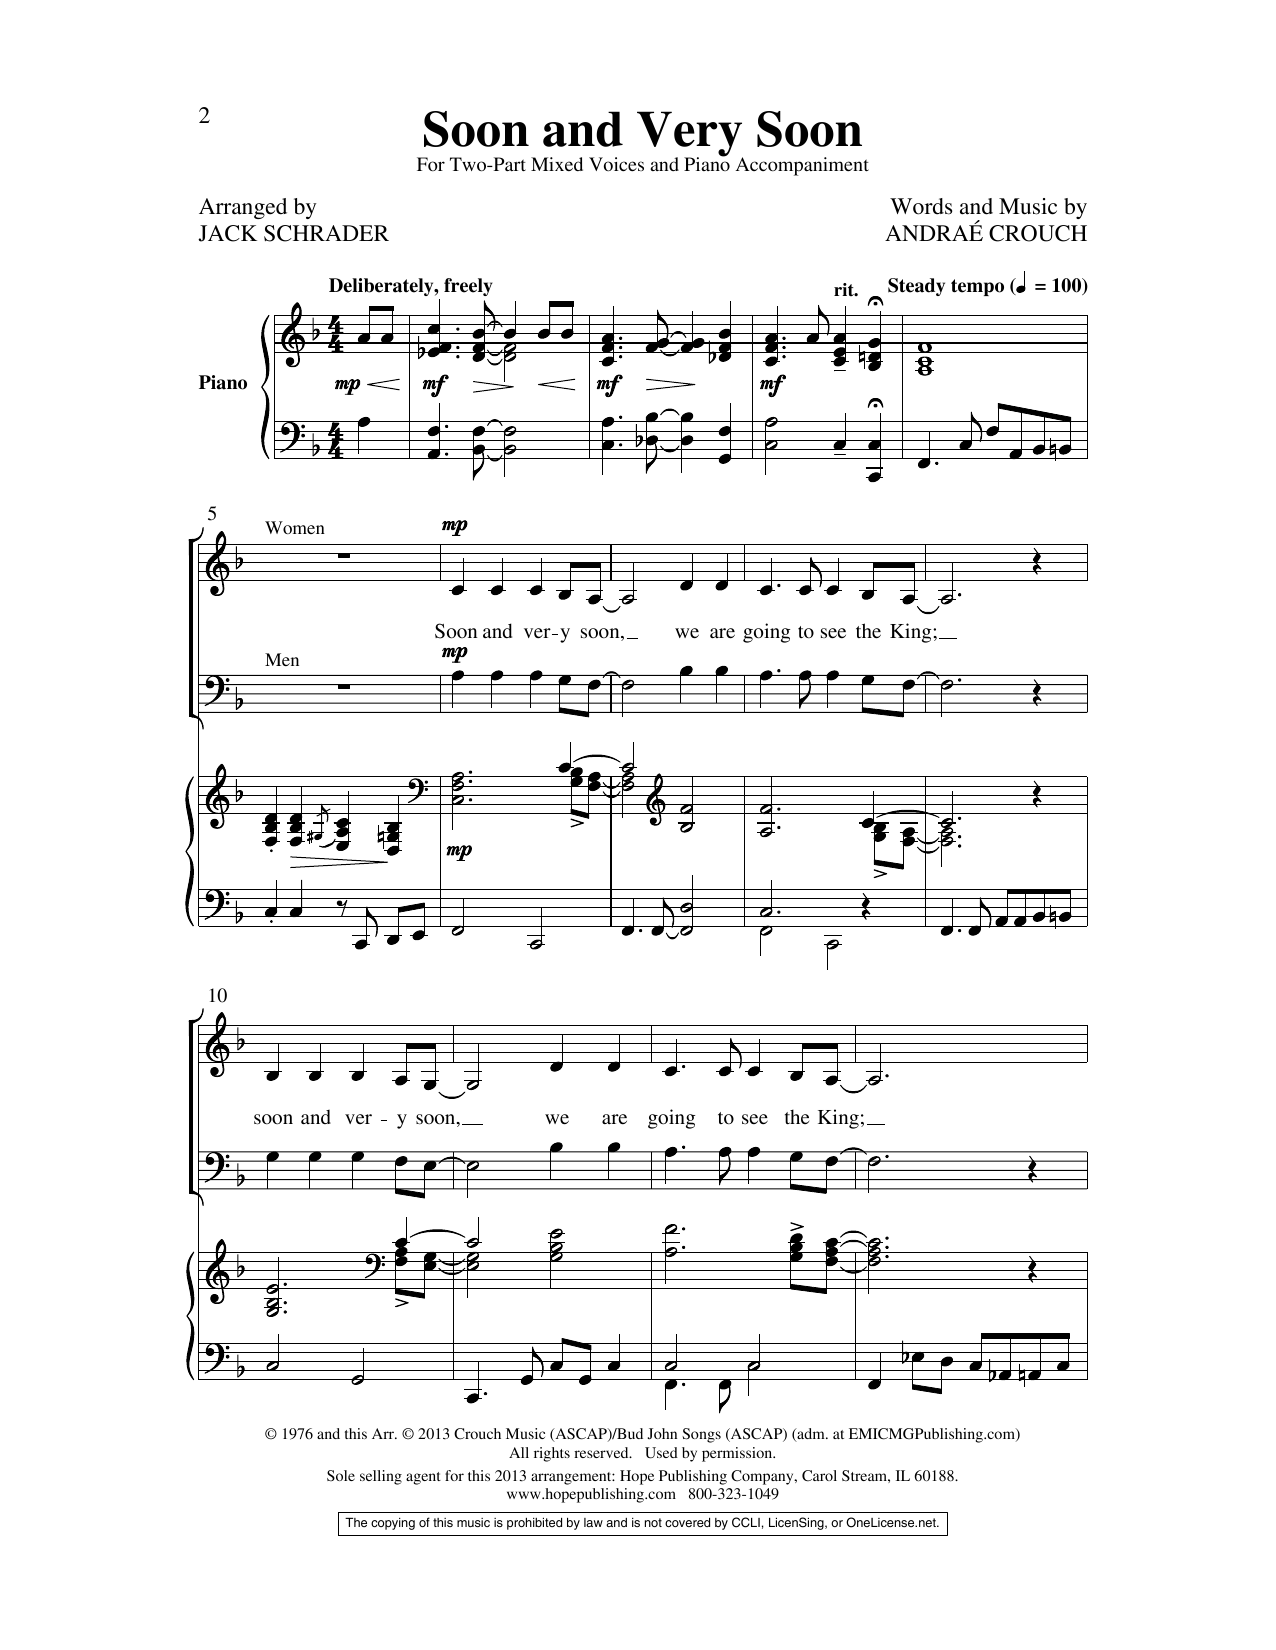 Download Andrae Crouch Soon and Very Soon (arr. Jack Schrader) Sheet Music